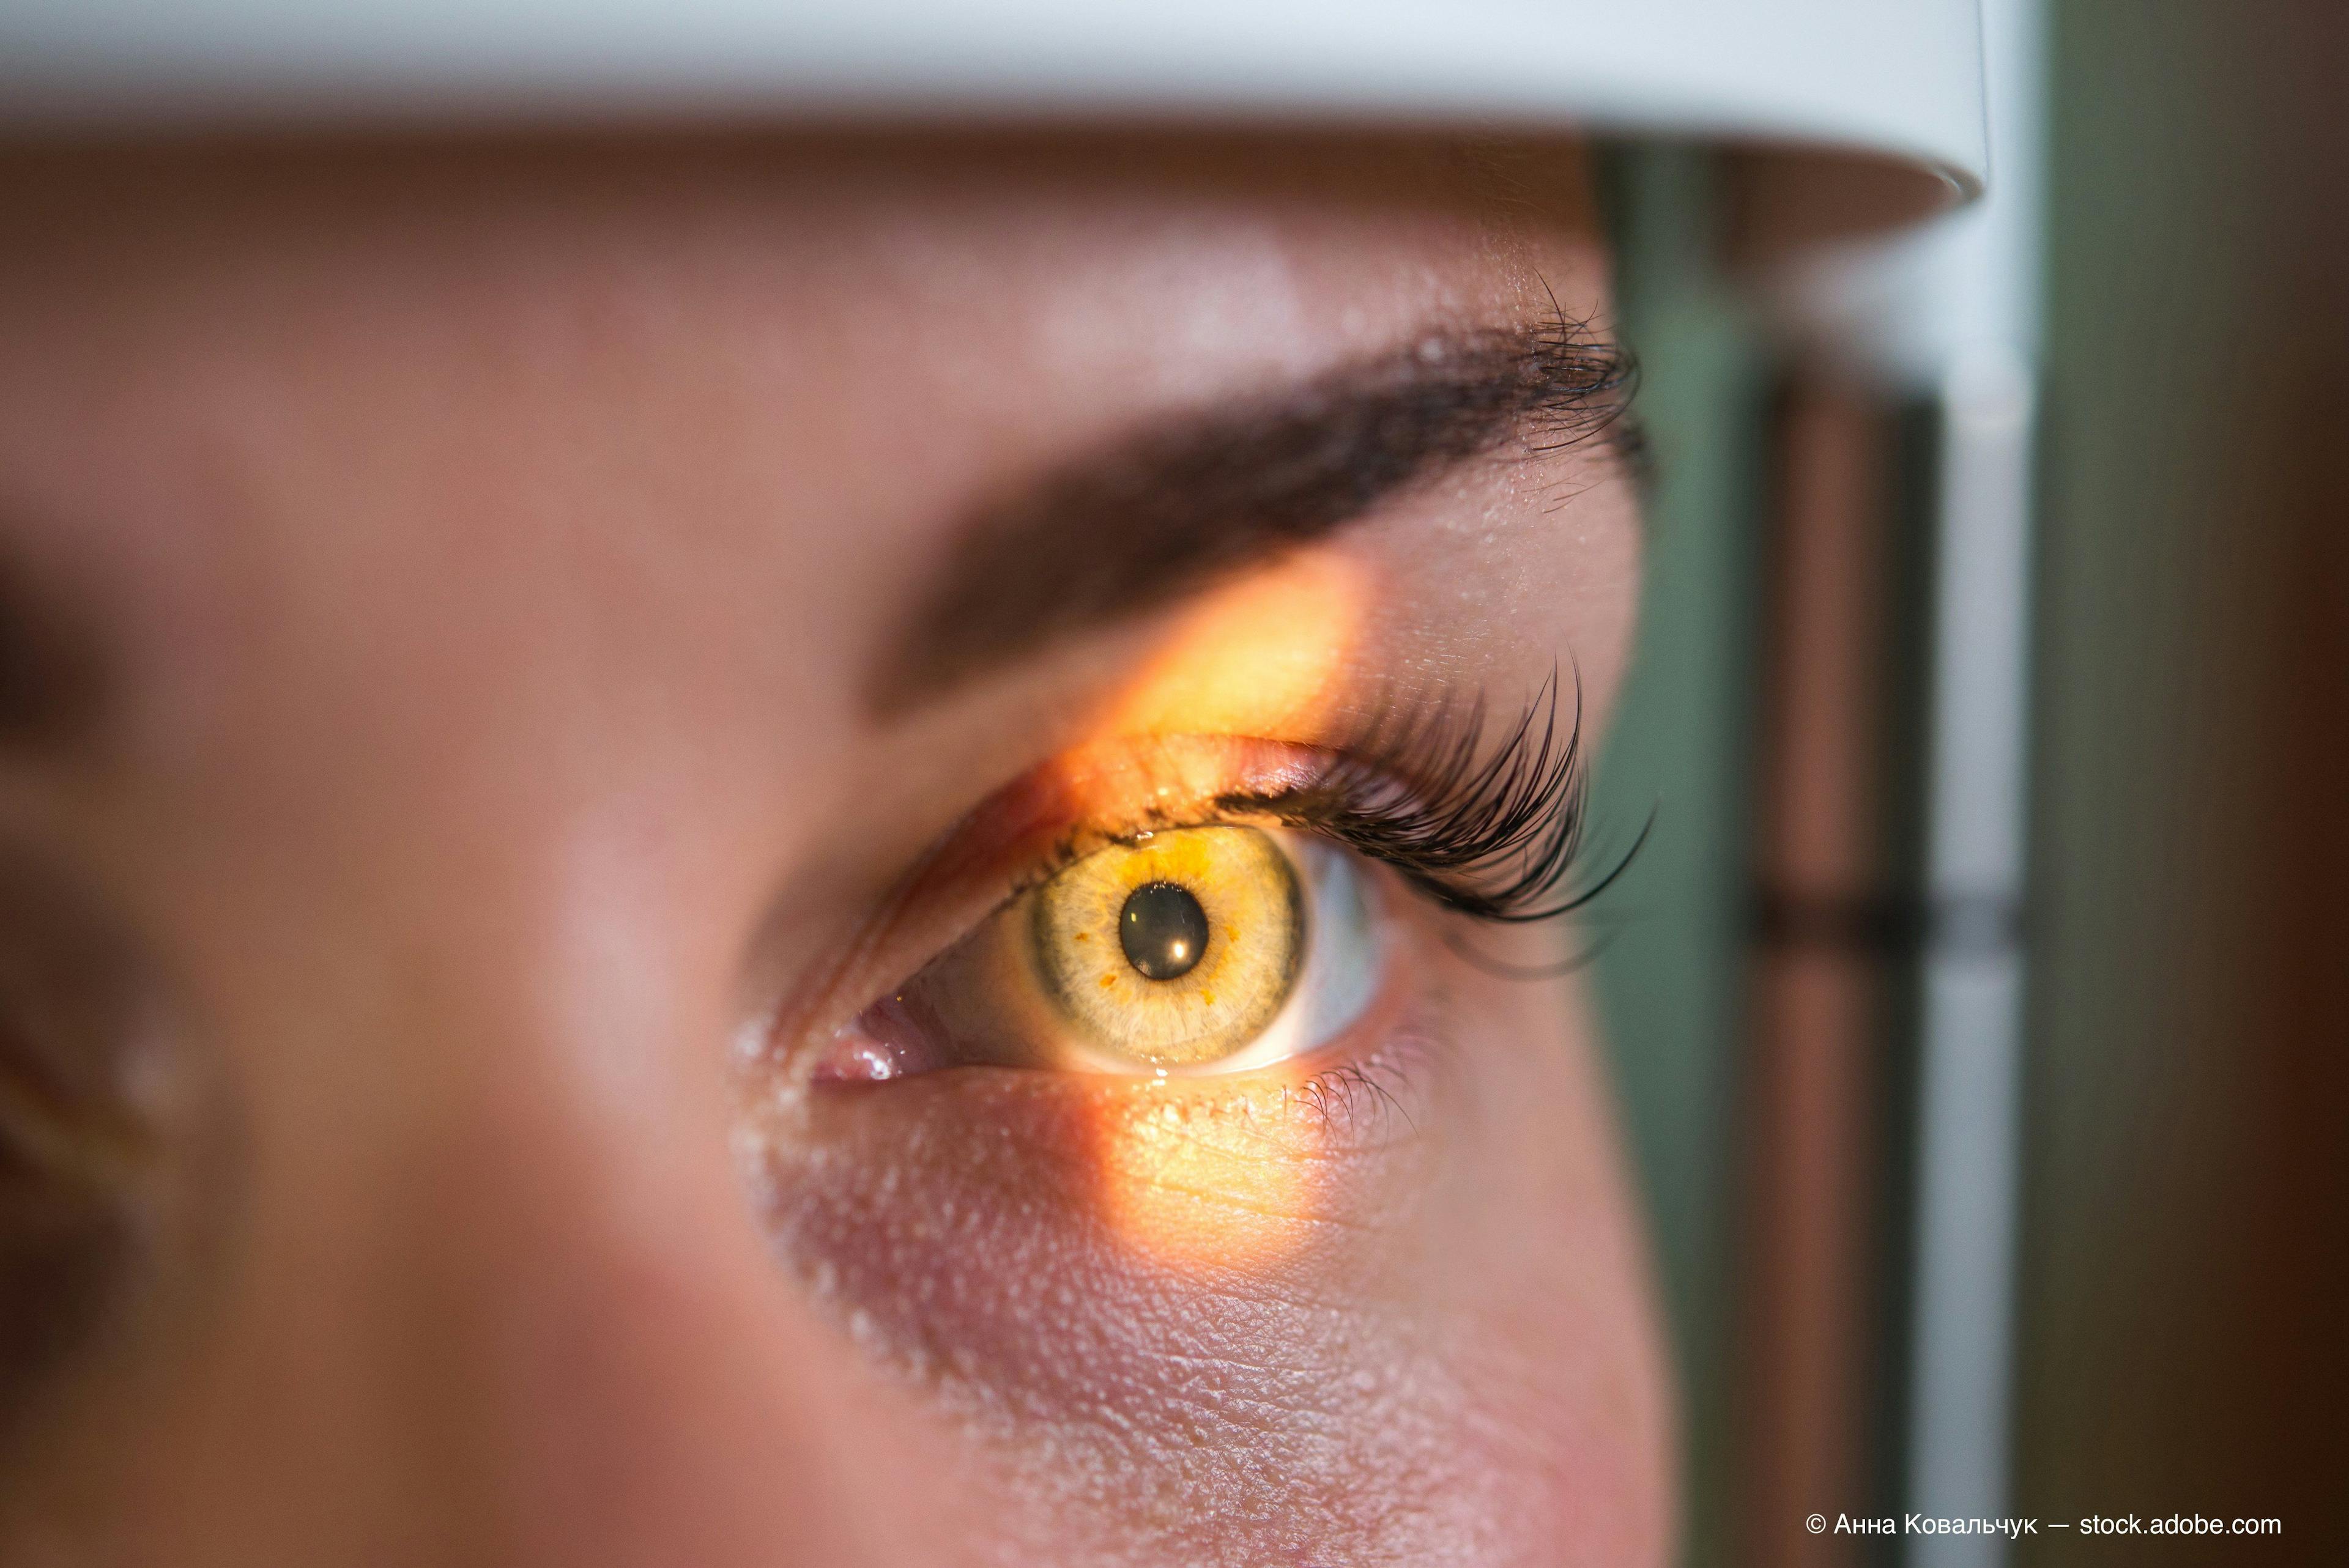 Implanted chip, natural eyesight coordinate vision in study of macular degeneration patients